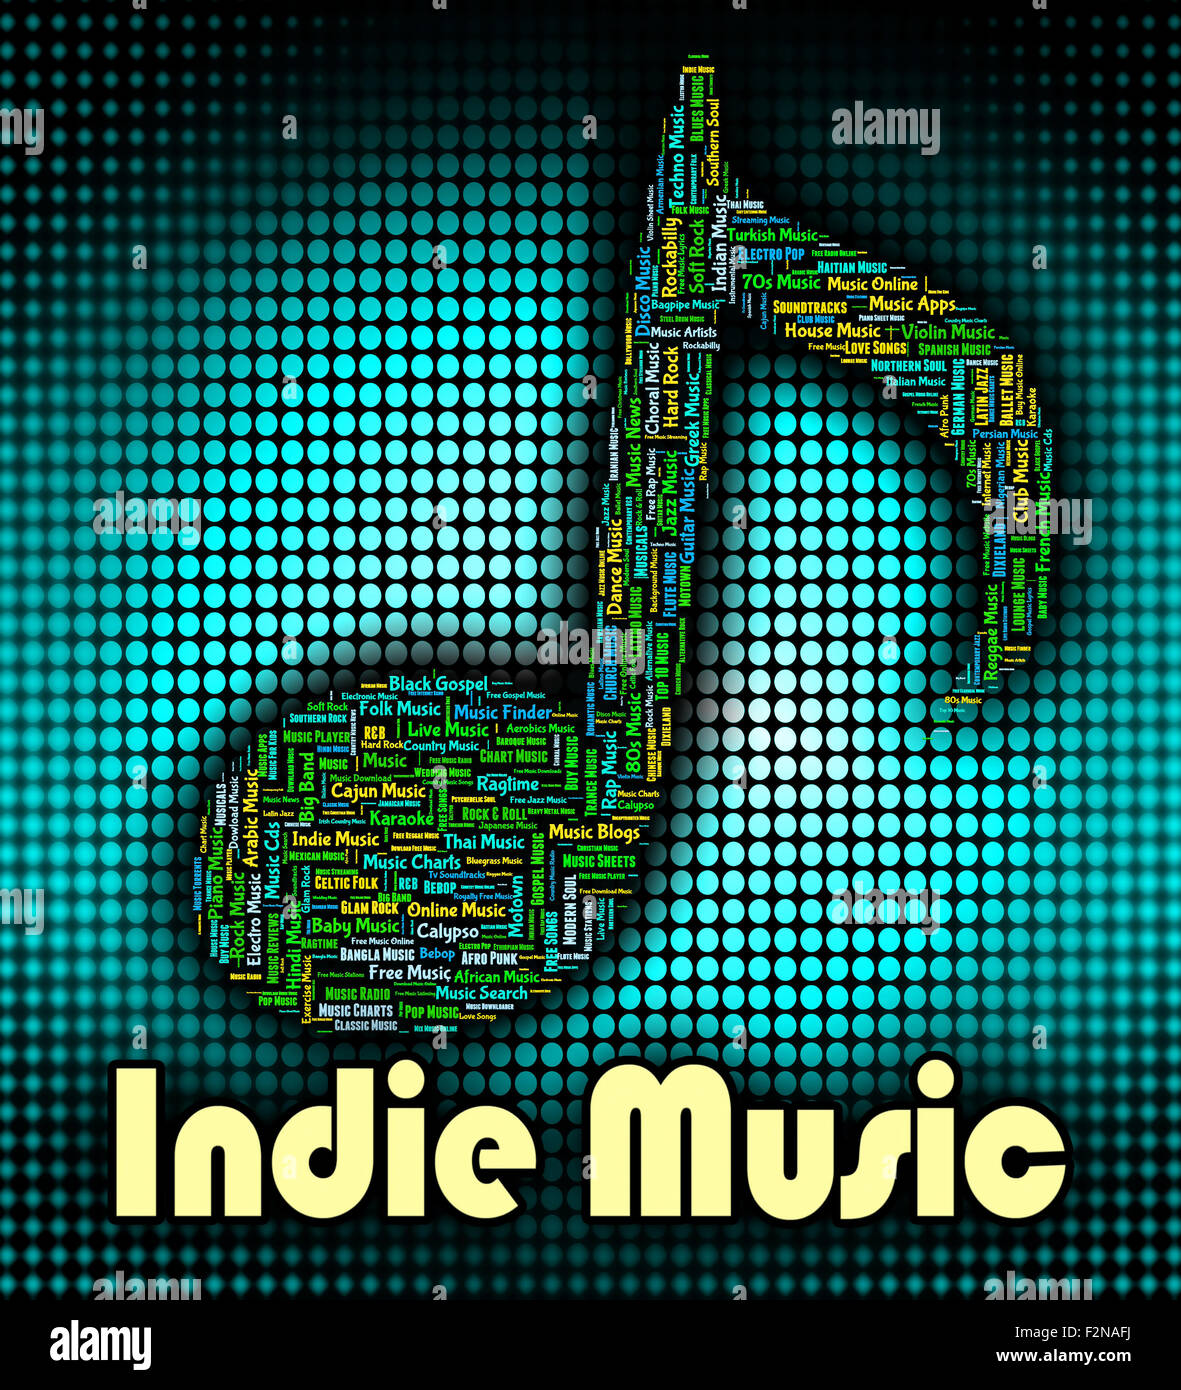 Indie Music Meaning Sound Track And Rock Stock Photo - Alamy